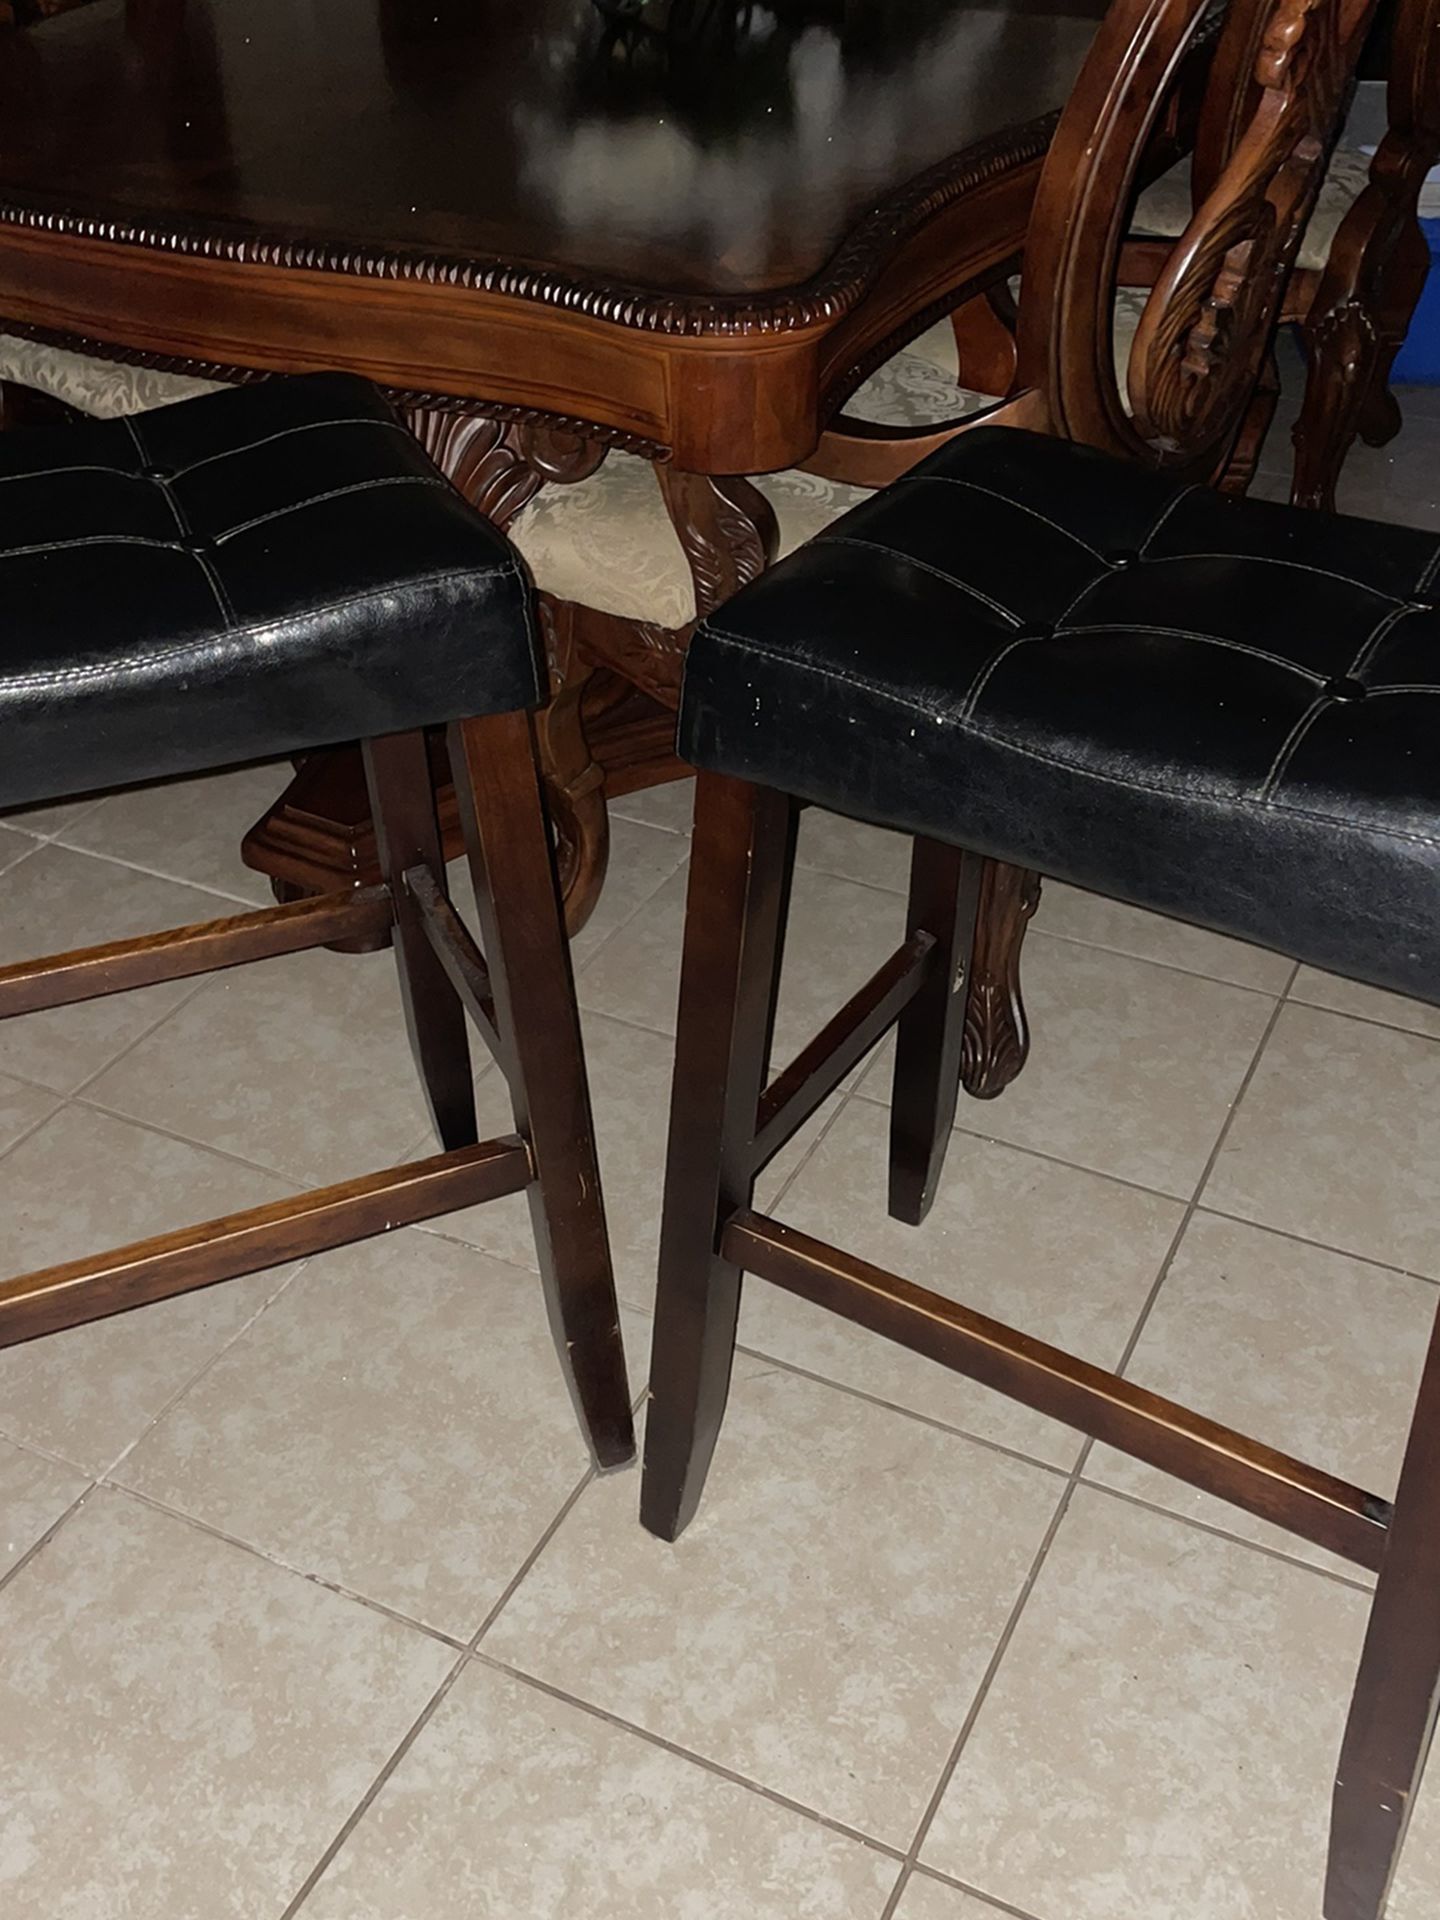 Two Bar Stools 20 Each or 30 for both